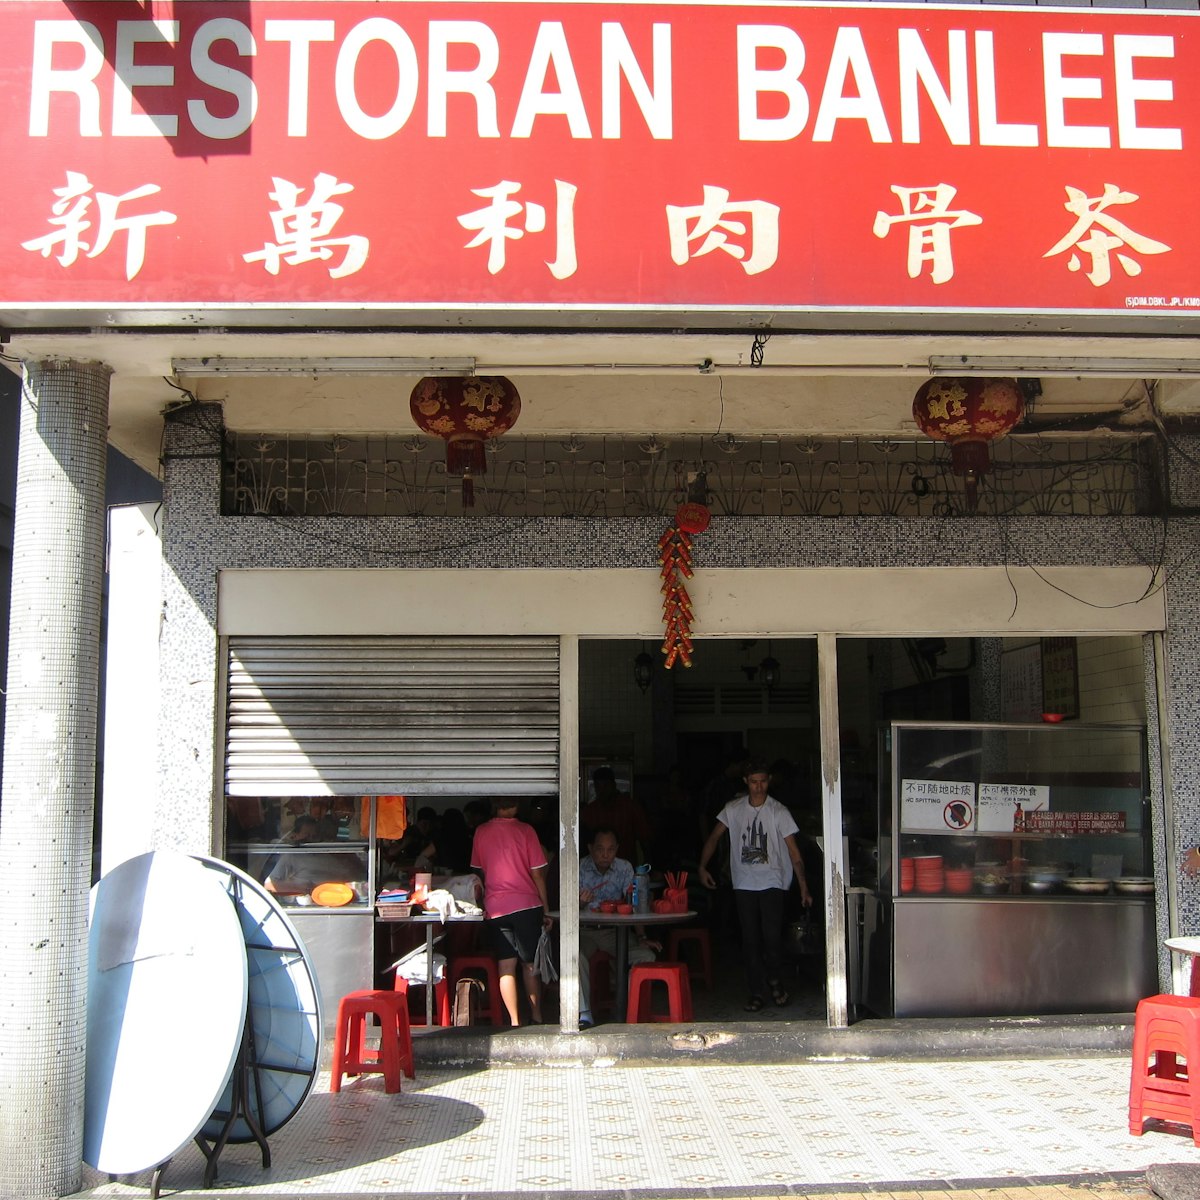 Ban Lee. The decades old Ban Lee is an institution on Jalan Ipoh